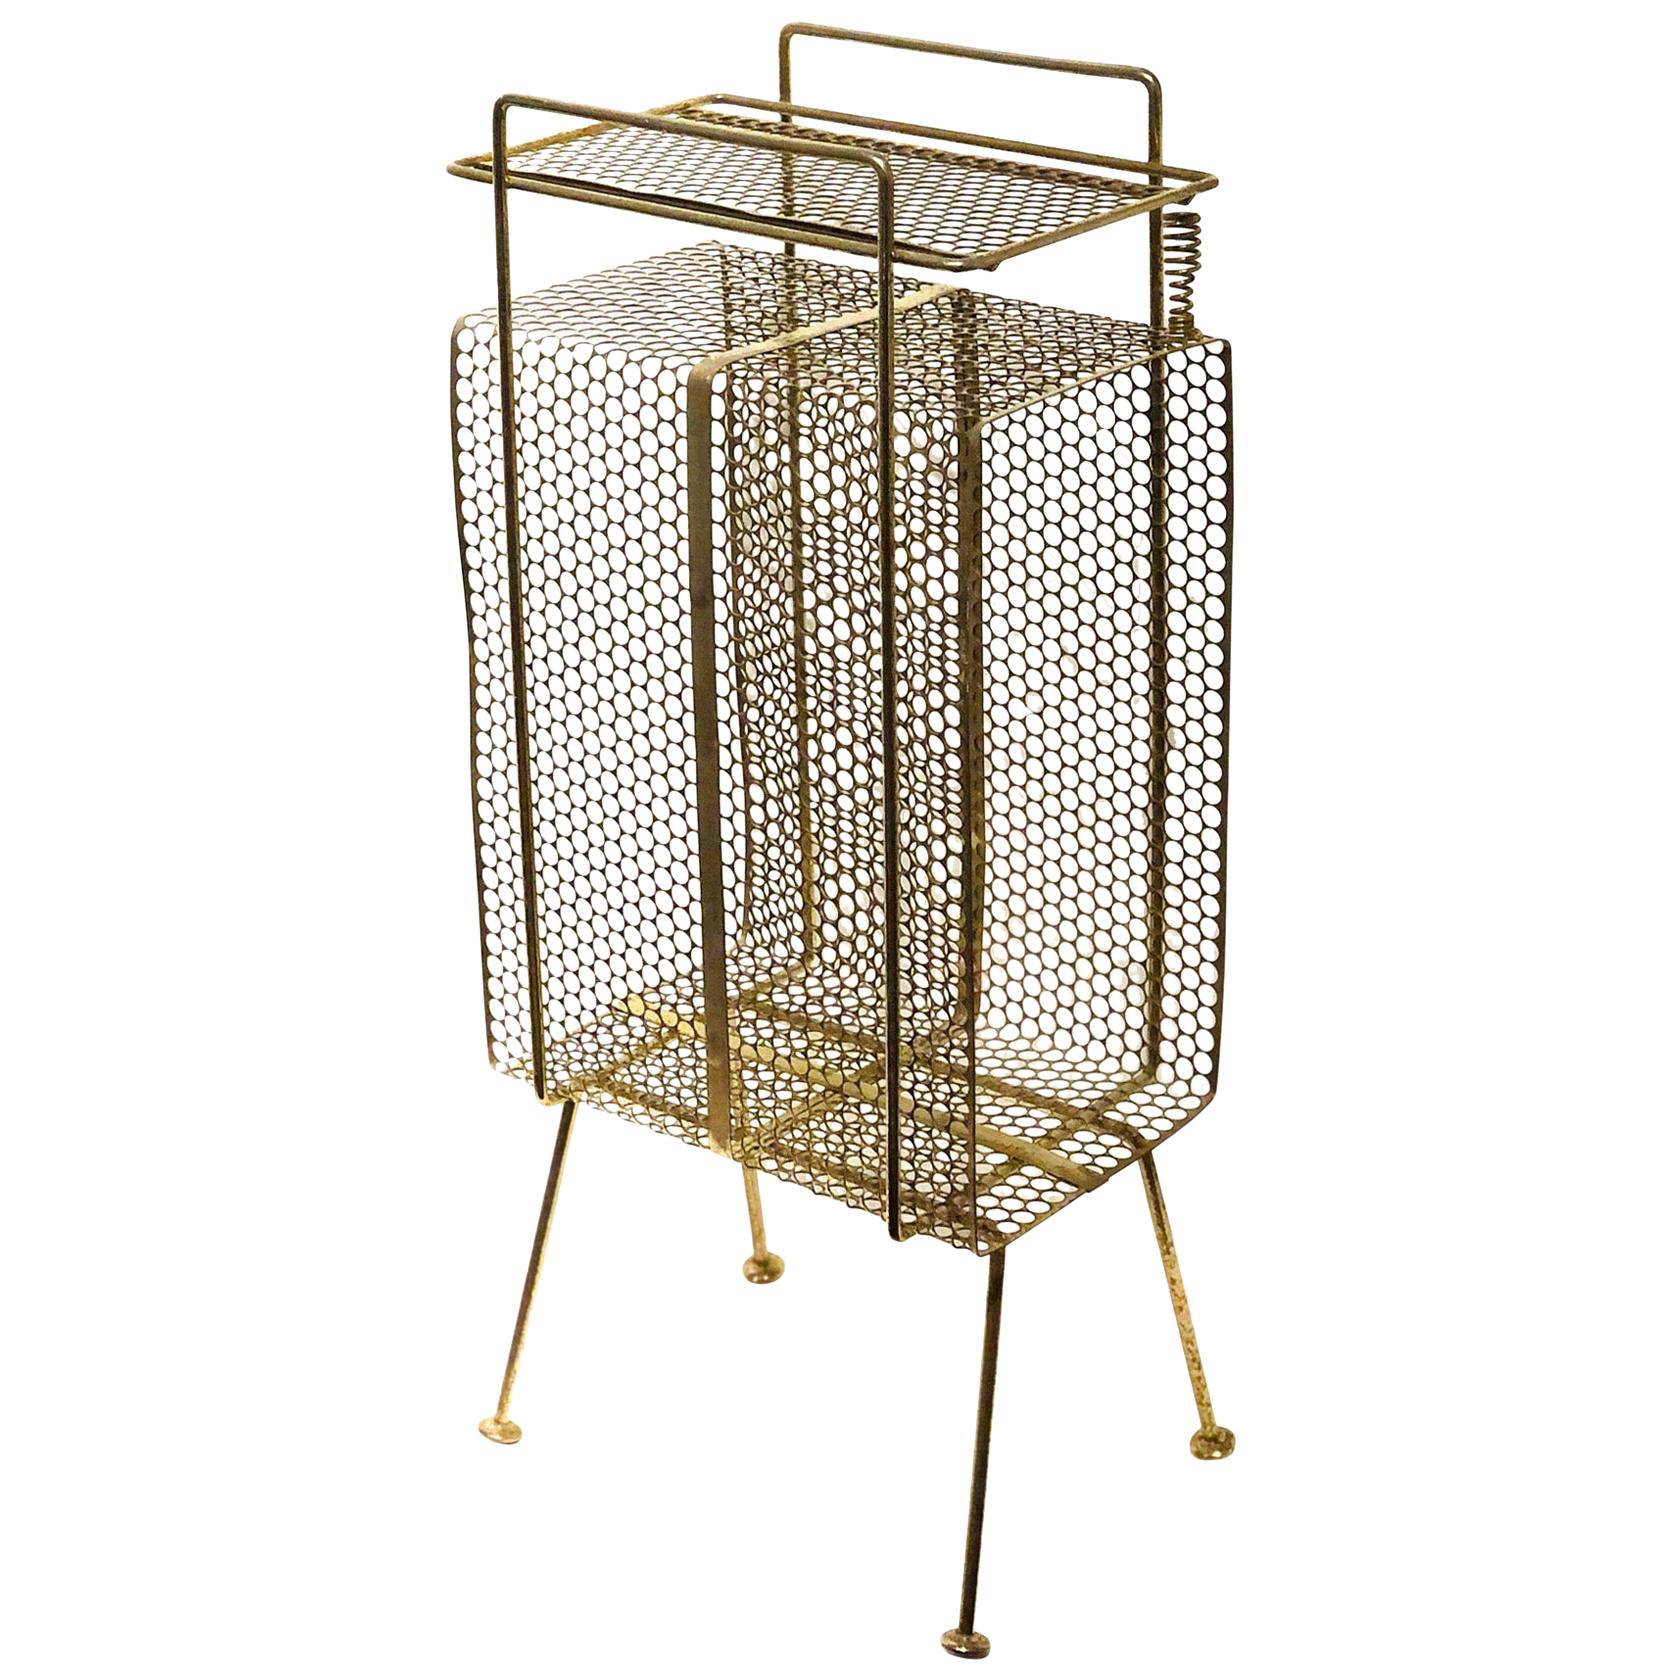 Richard Galef Wire Perforated Metal Stand/ Rack in Brass Finish